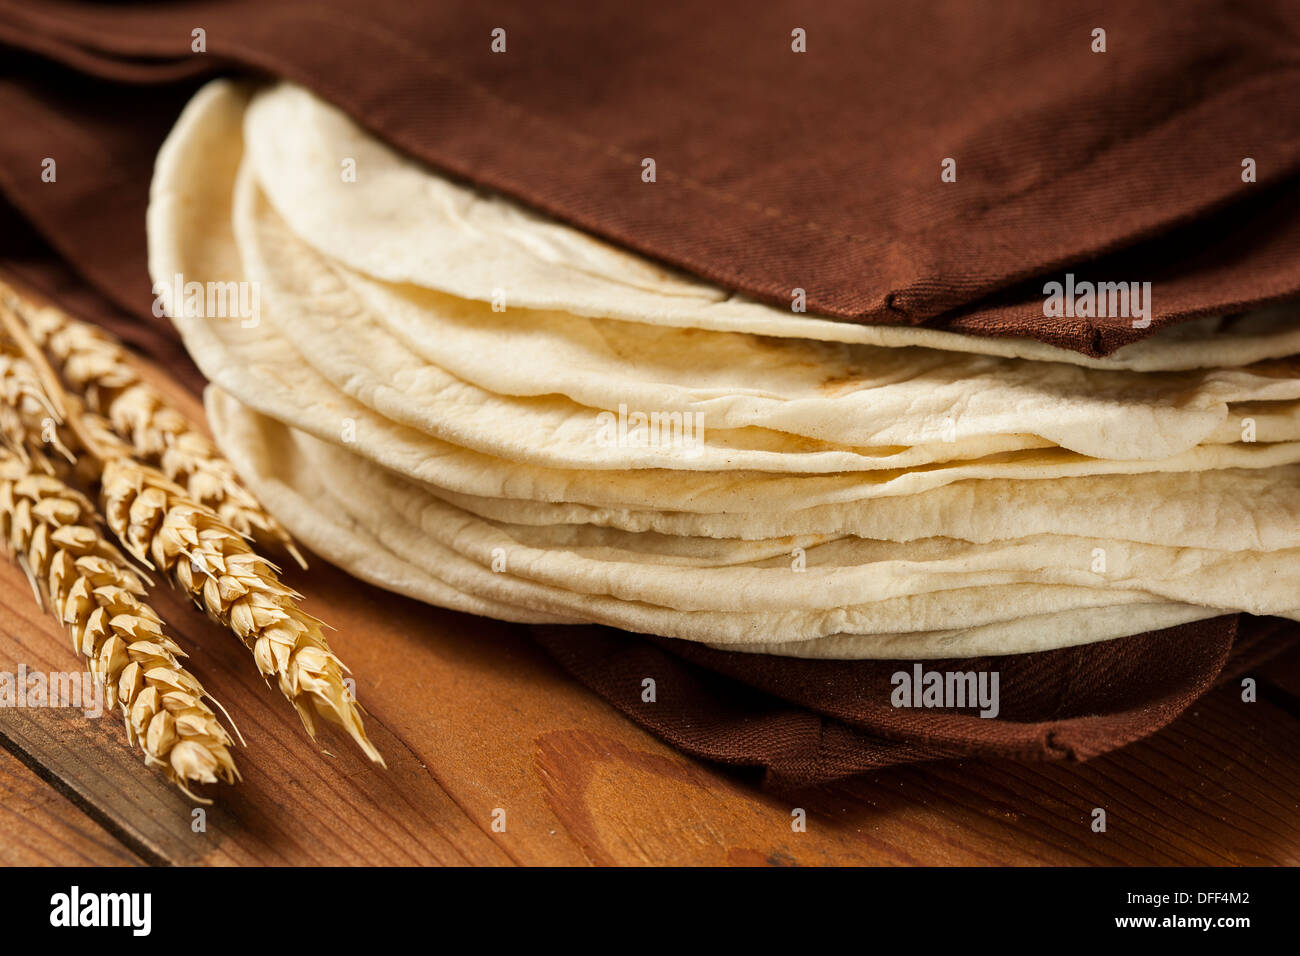 Stack of Homemade Whole Wheat Flour Tortillas Stock Photo